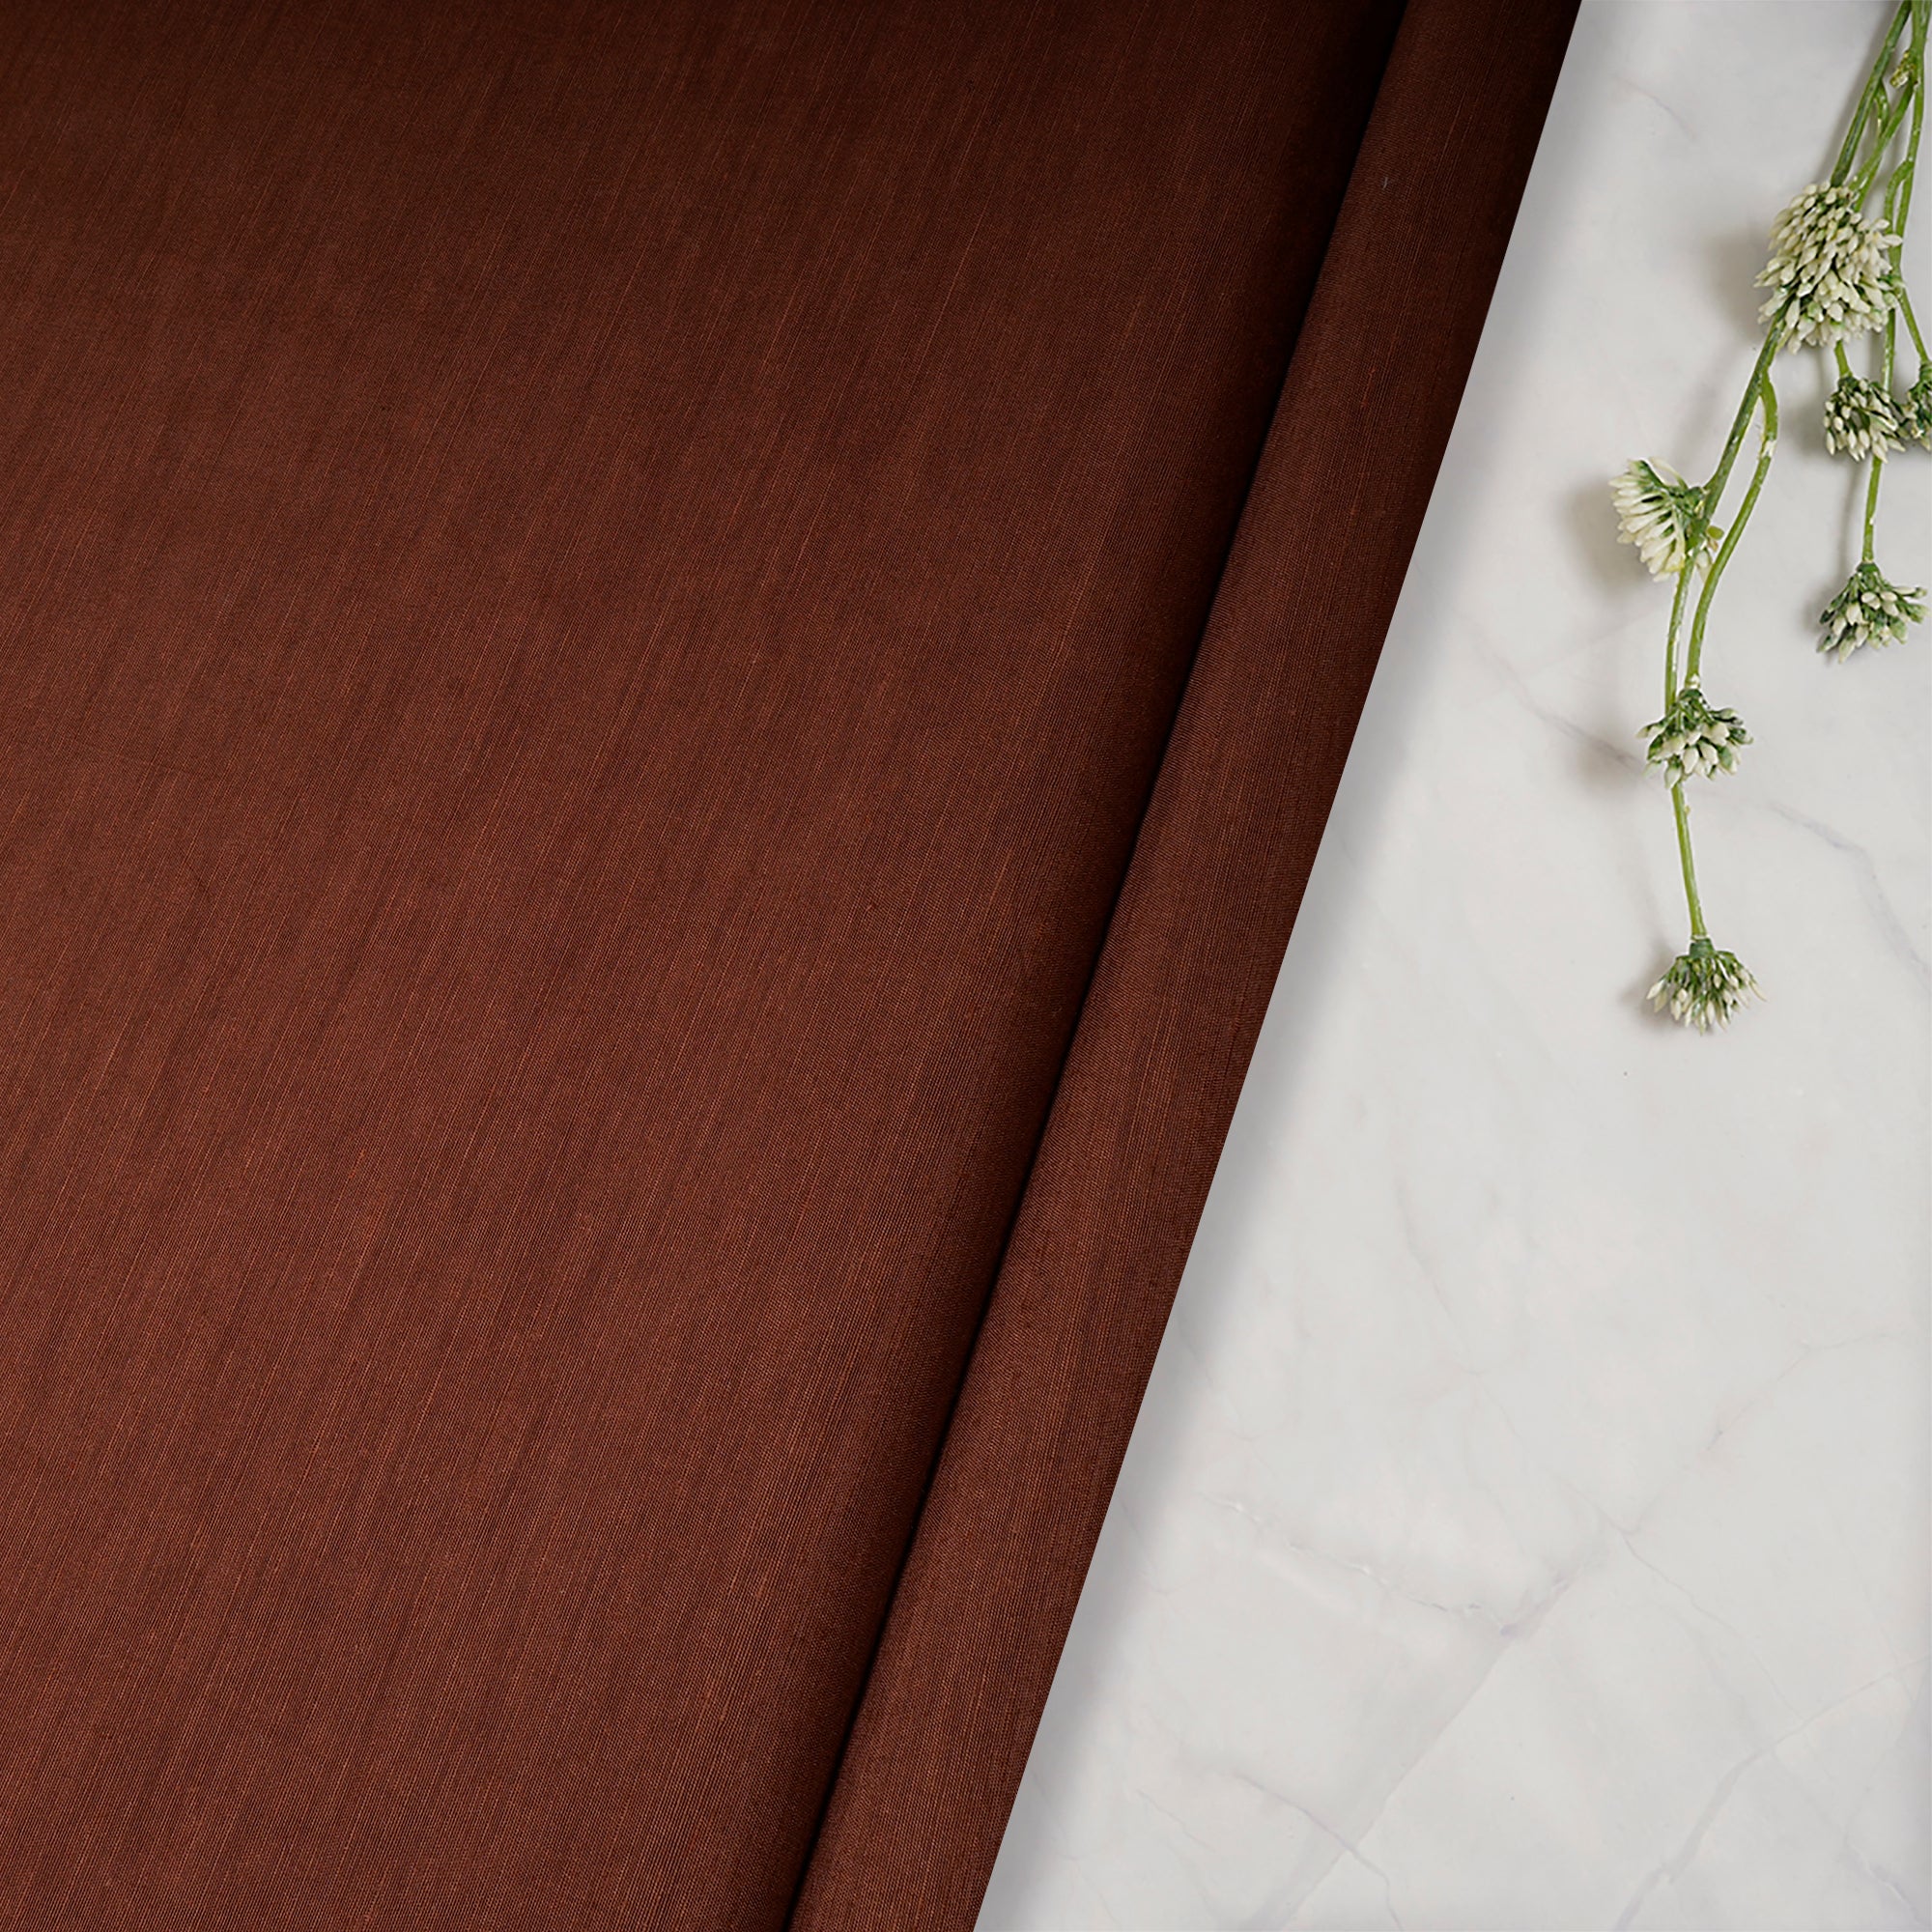 Brown Color Bemberg Linen Fabric